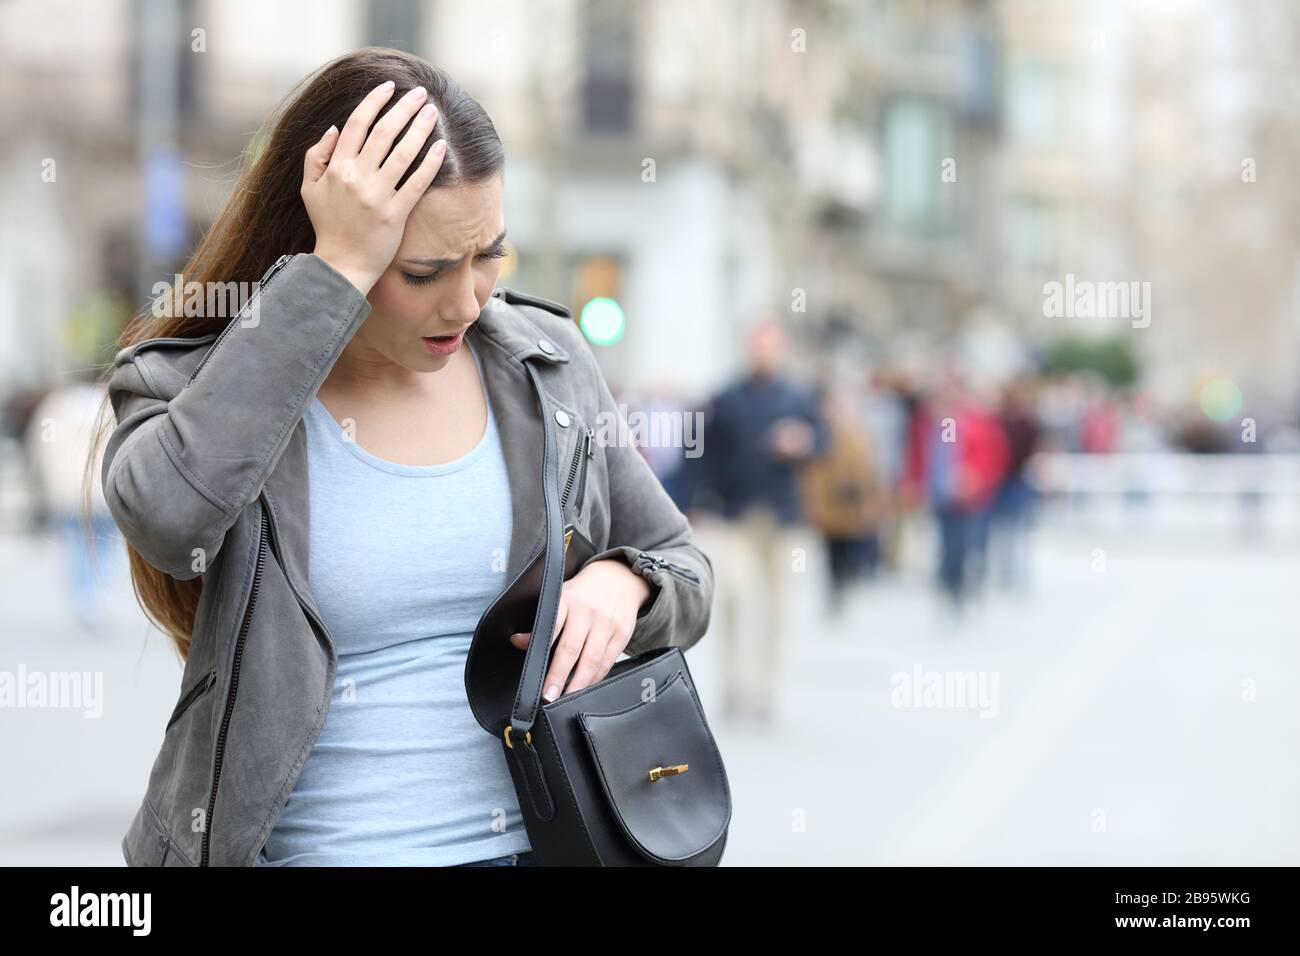 Worried girl looking preoccupied inside her shoulder bag on a city street Stock Photo